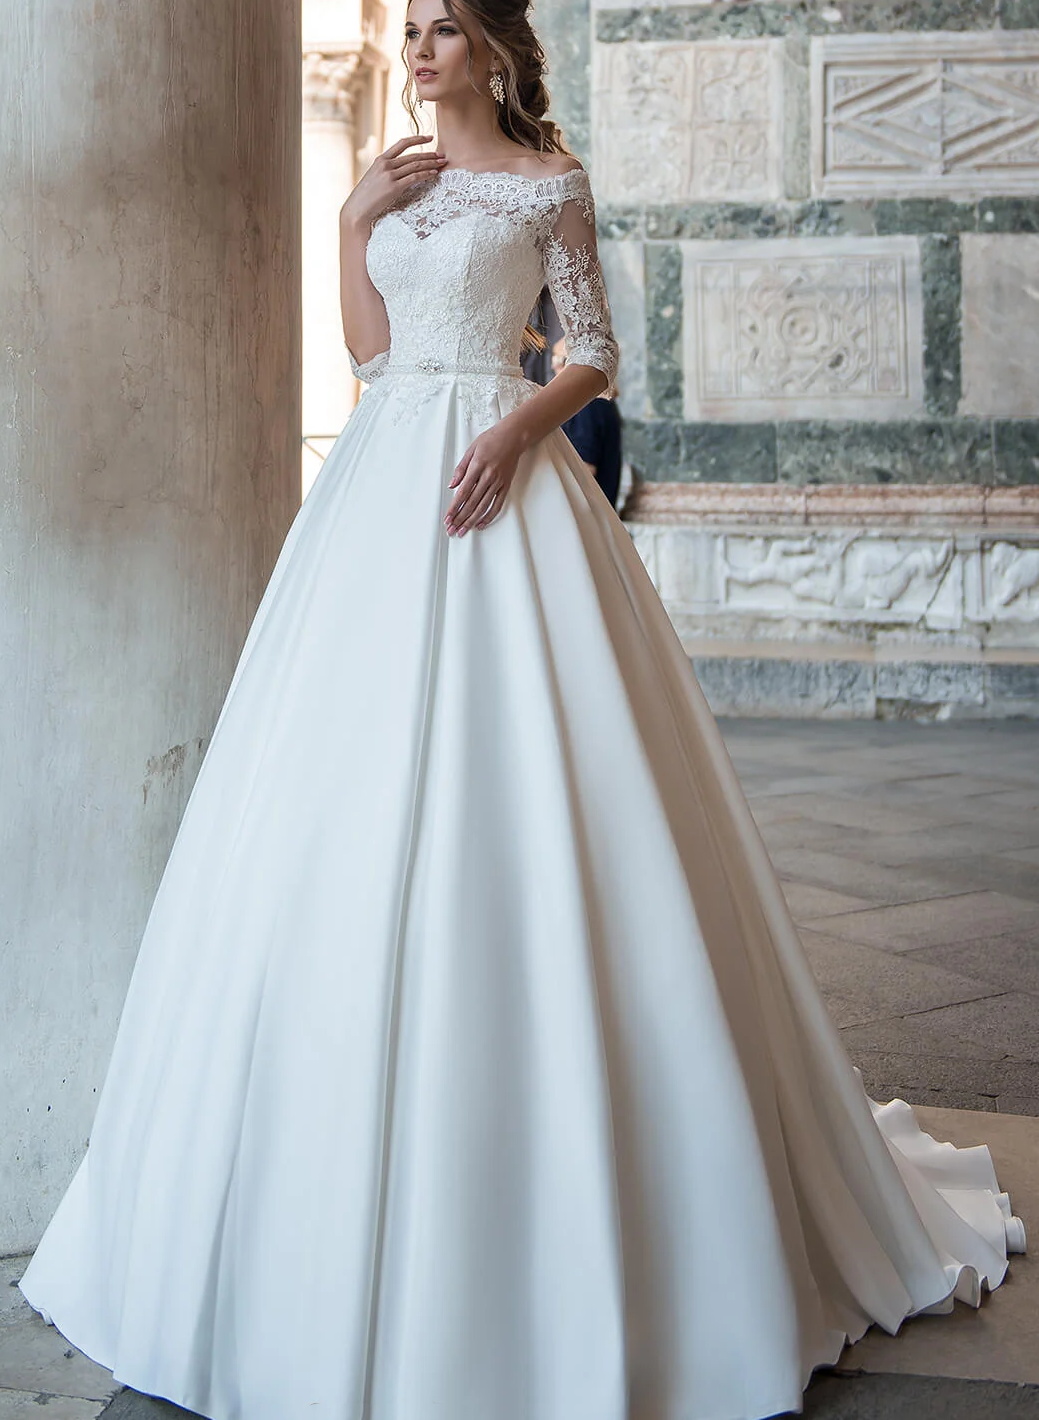 Classic Off-The-Shoulder Ball-Gown Wedding Dresses With Sleeves